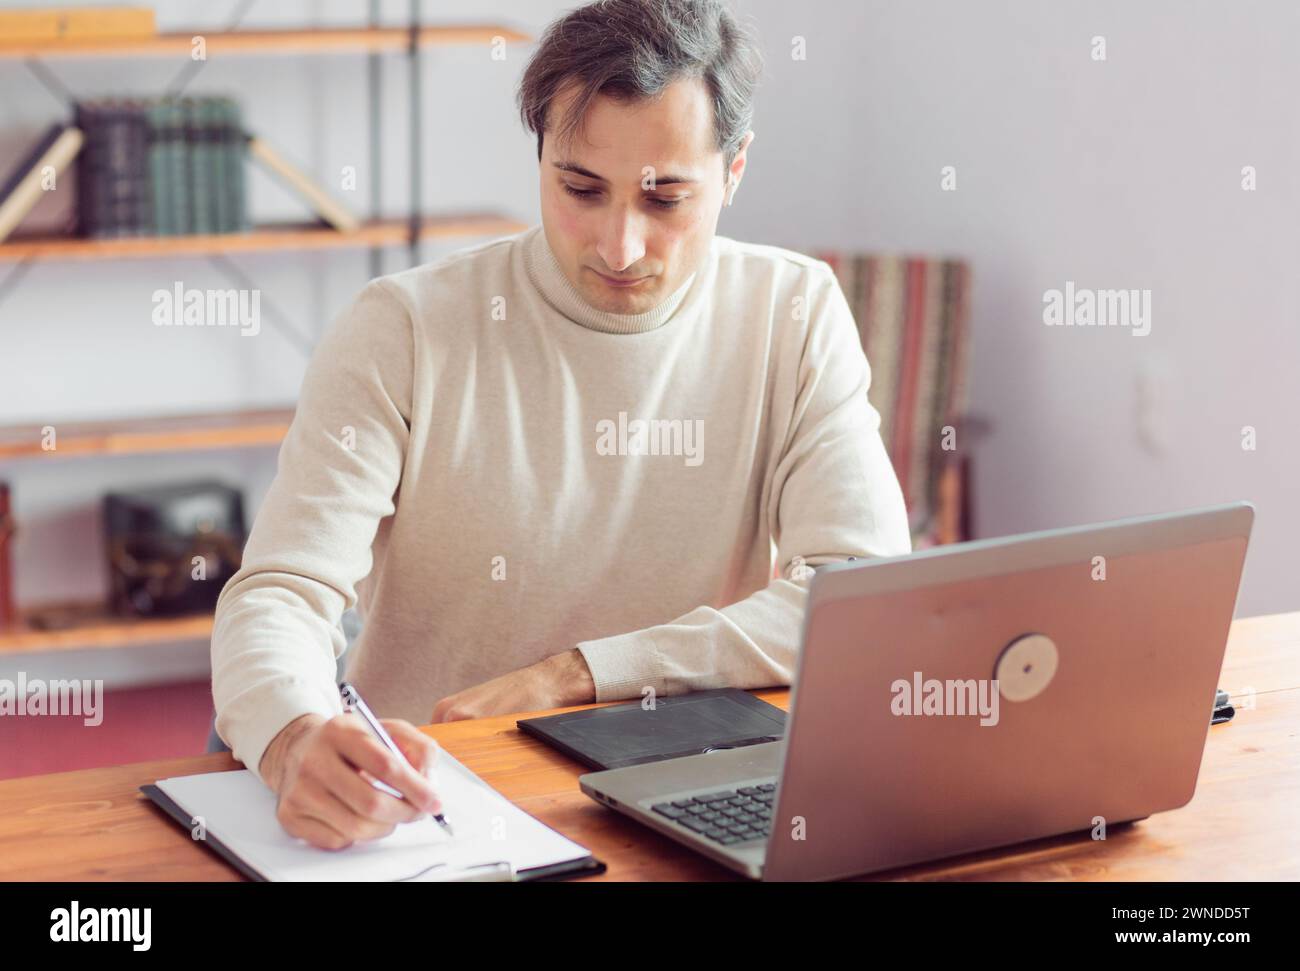 A graphic designer in the office works at a laptop and graphics tablet, sketching with a pencil on paper. Focus on a concentrated face. Stock Photo